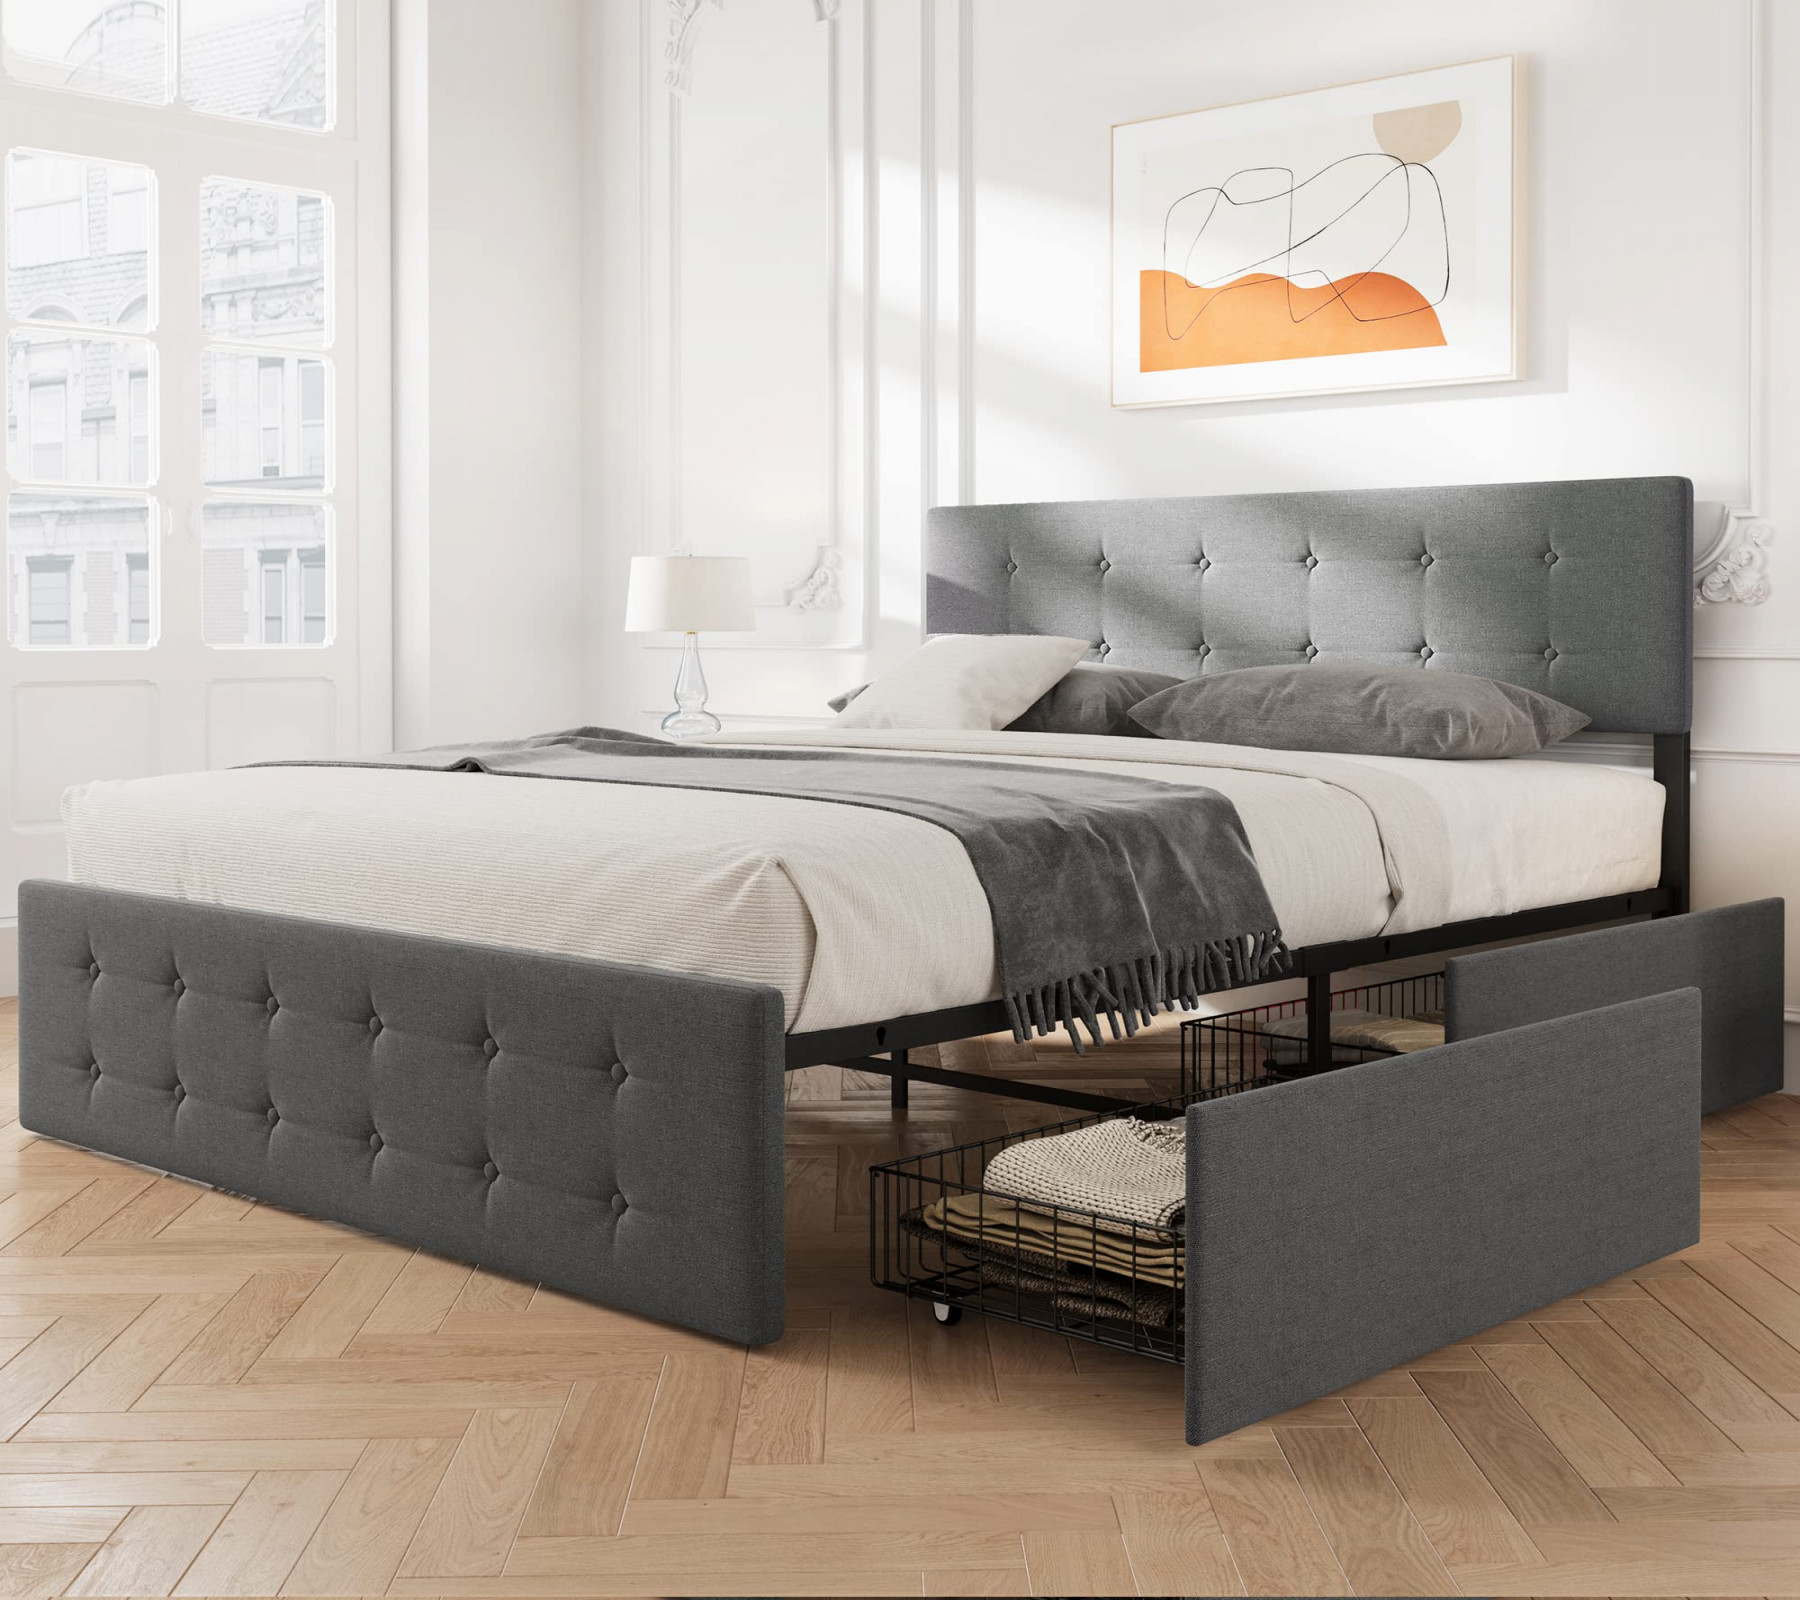 IDEALHOUSE Full Bed Frame with  Storage Drawers and Headboard, Adjustable  Upholstered Headboard Beds Mattress Foundation with Wood Slat Support, No